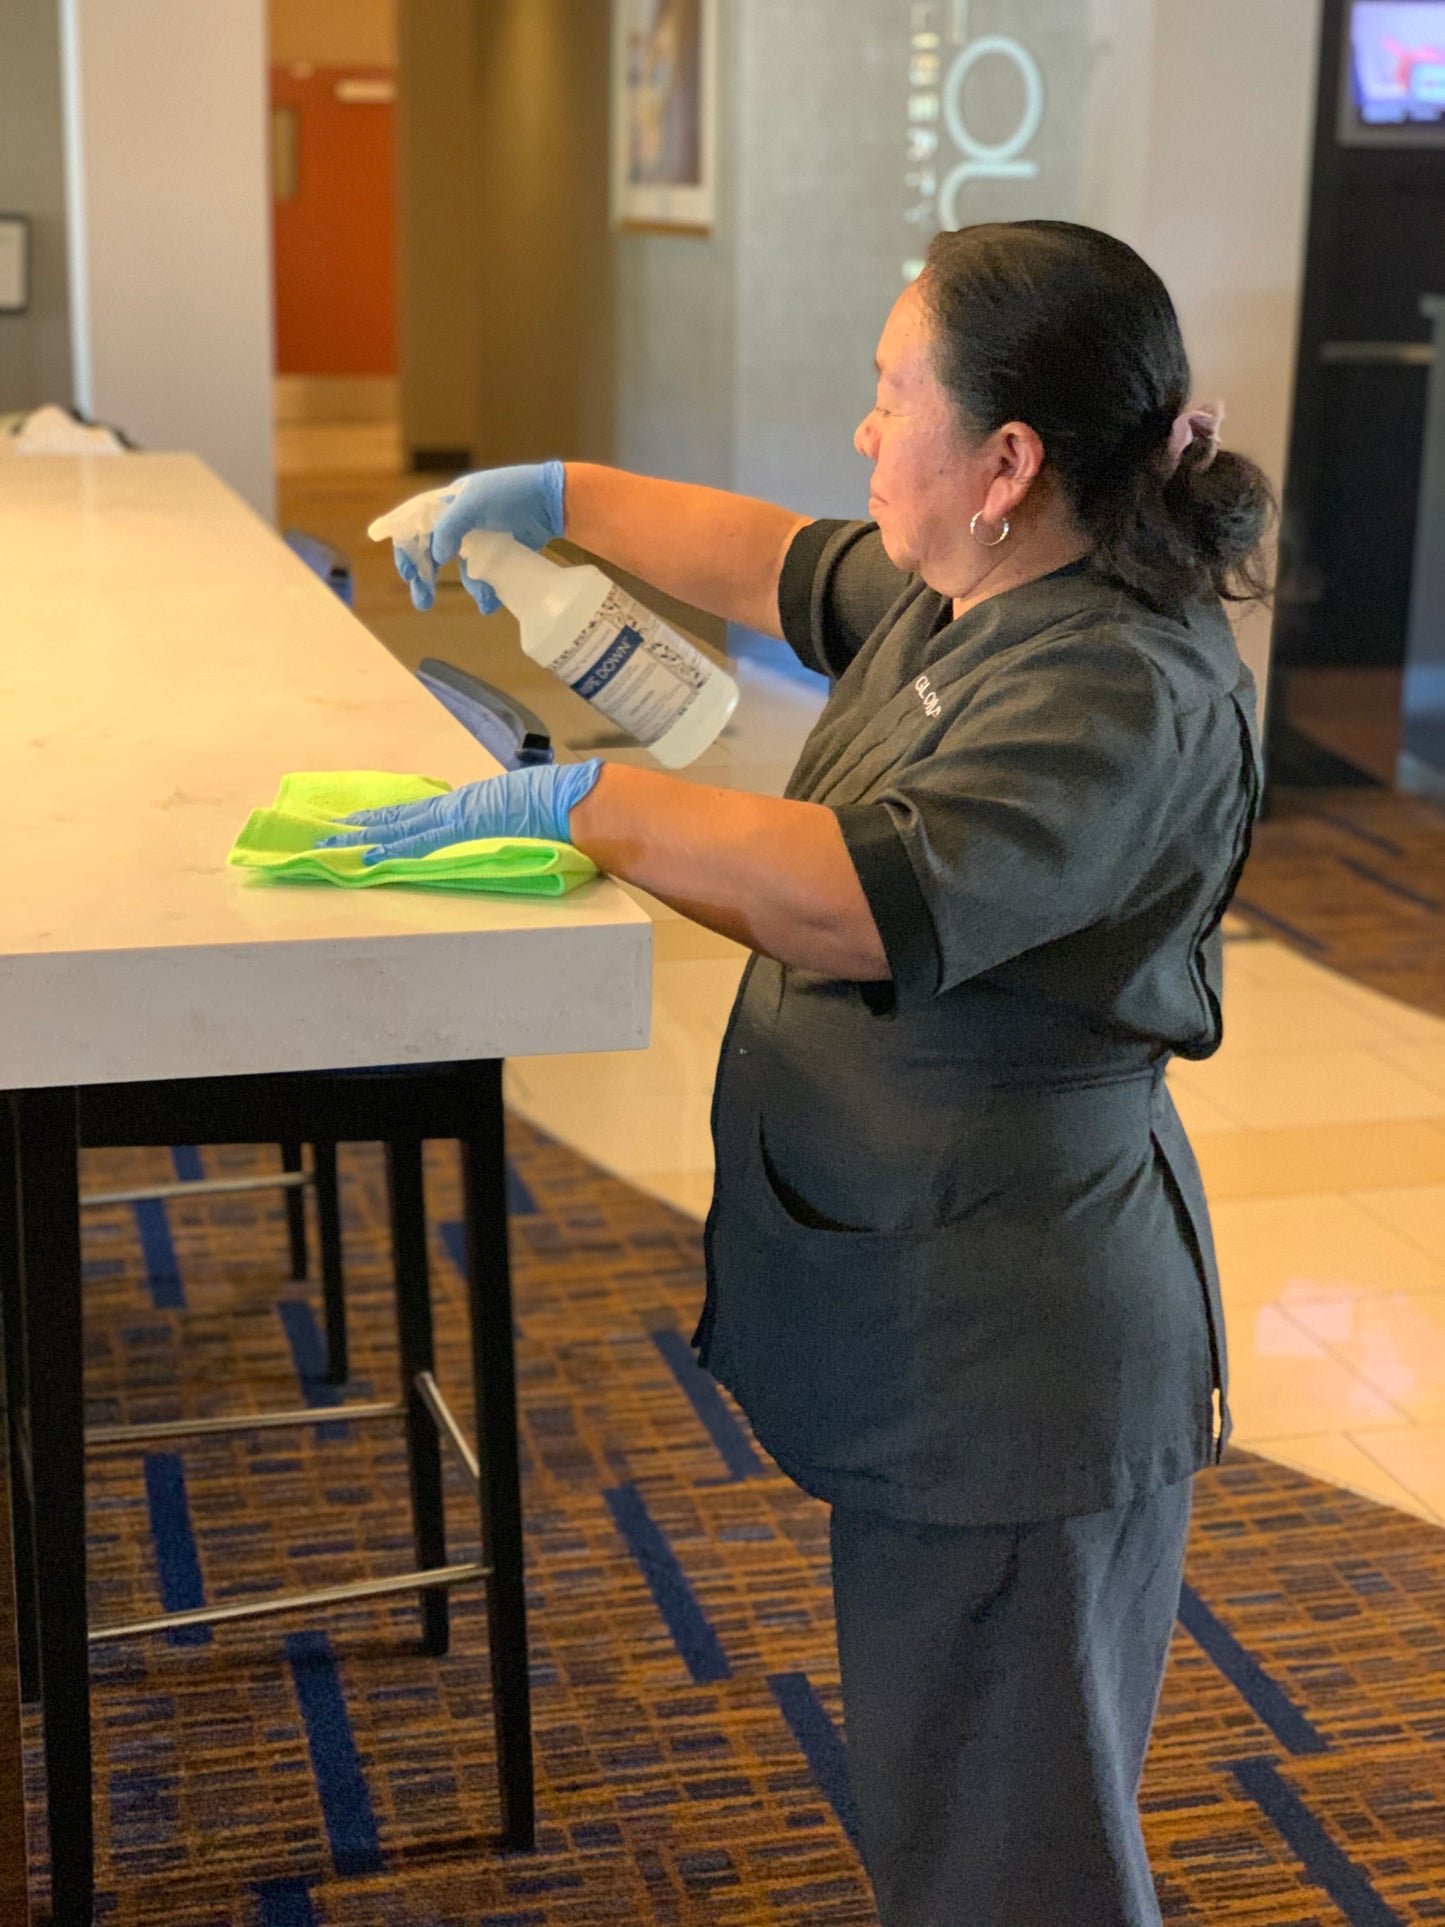 Hotel maid using Wipe Down to clean counter.